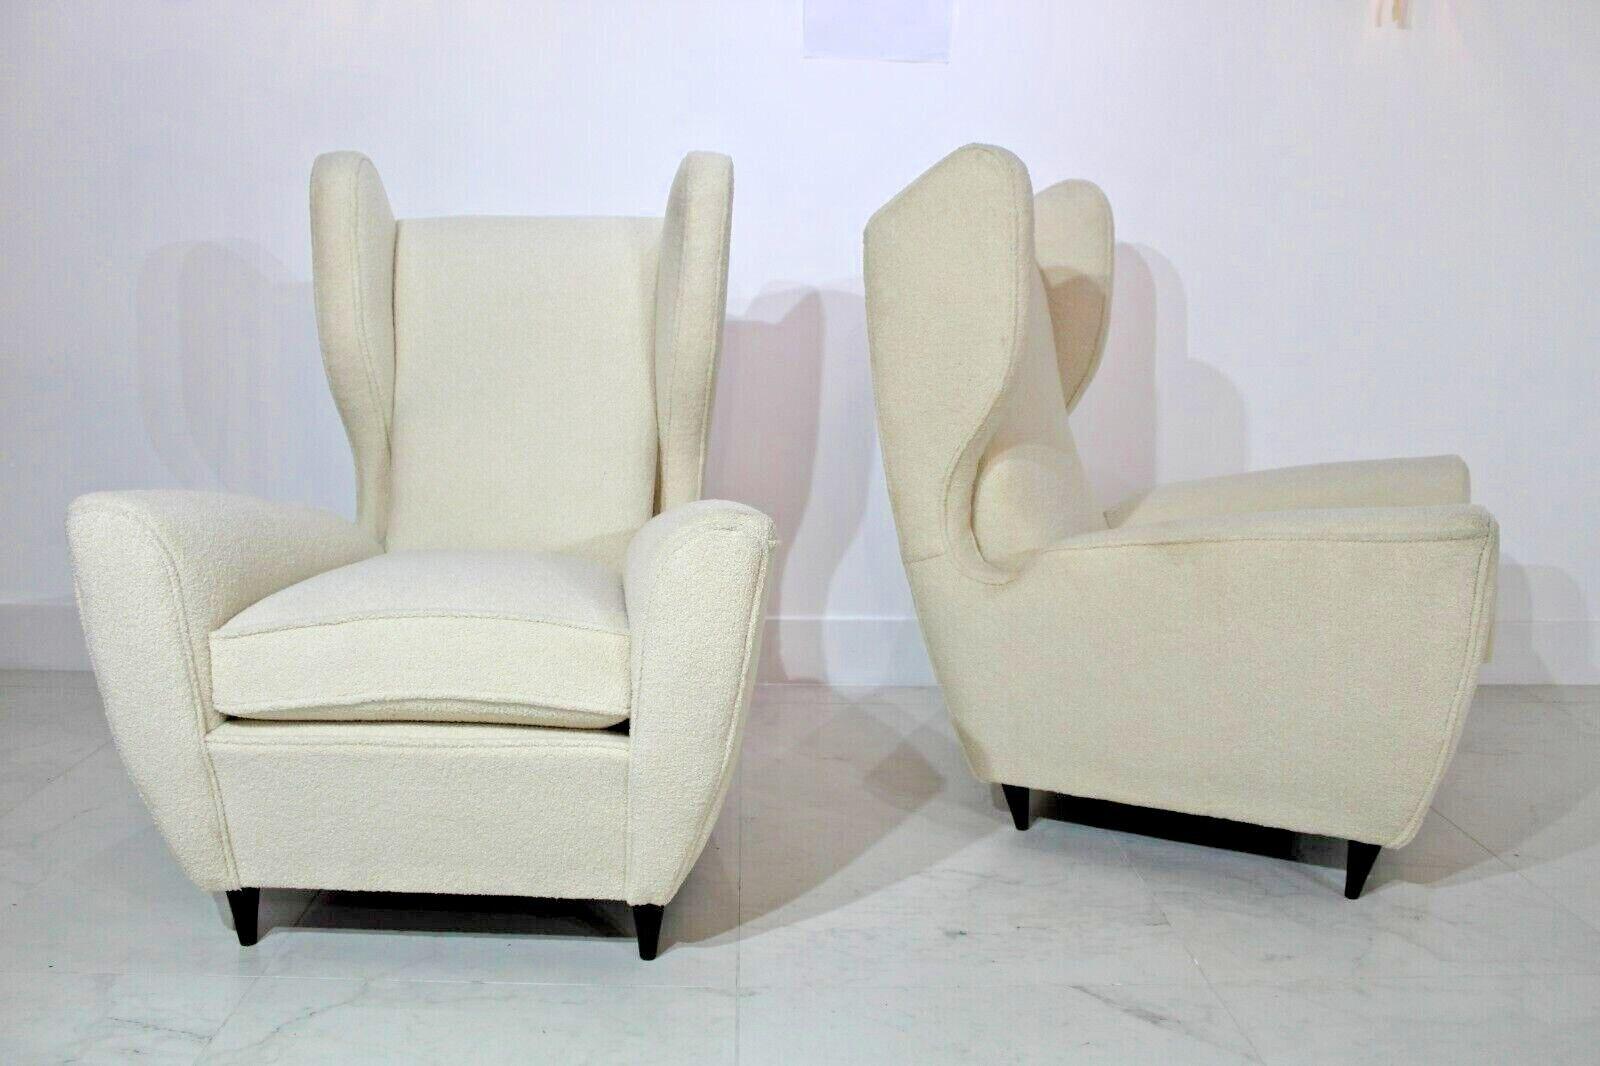 Pair of 1950's Italian armchairs recently reupholstered in cream boucle in the Manner of Gio Ponti.